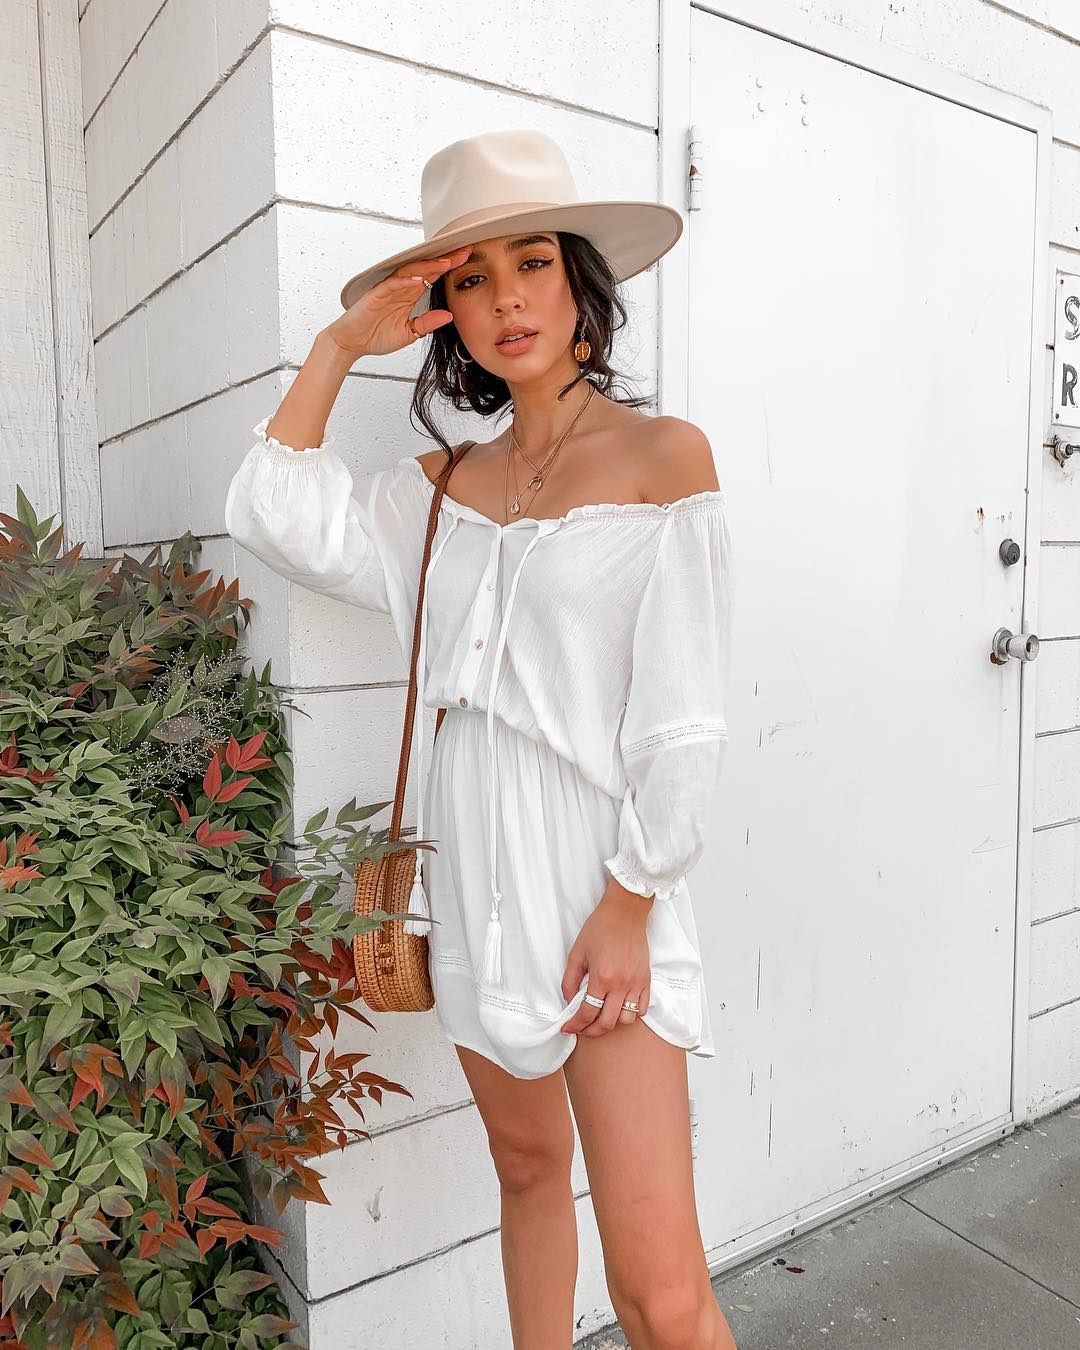 White Dress Outfits: Ideas for How to Wear a White Dress Like a Style Star